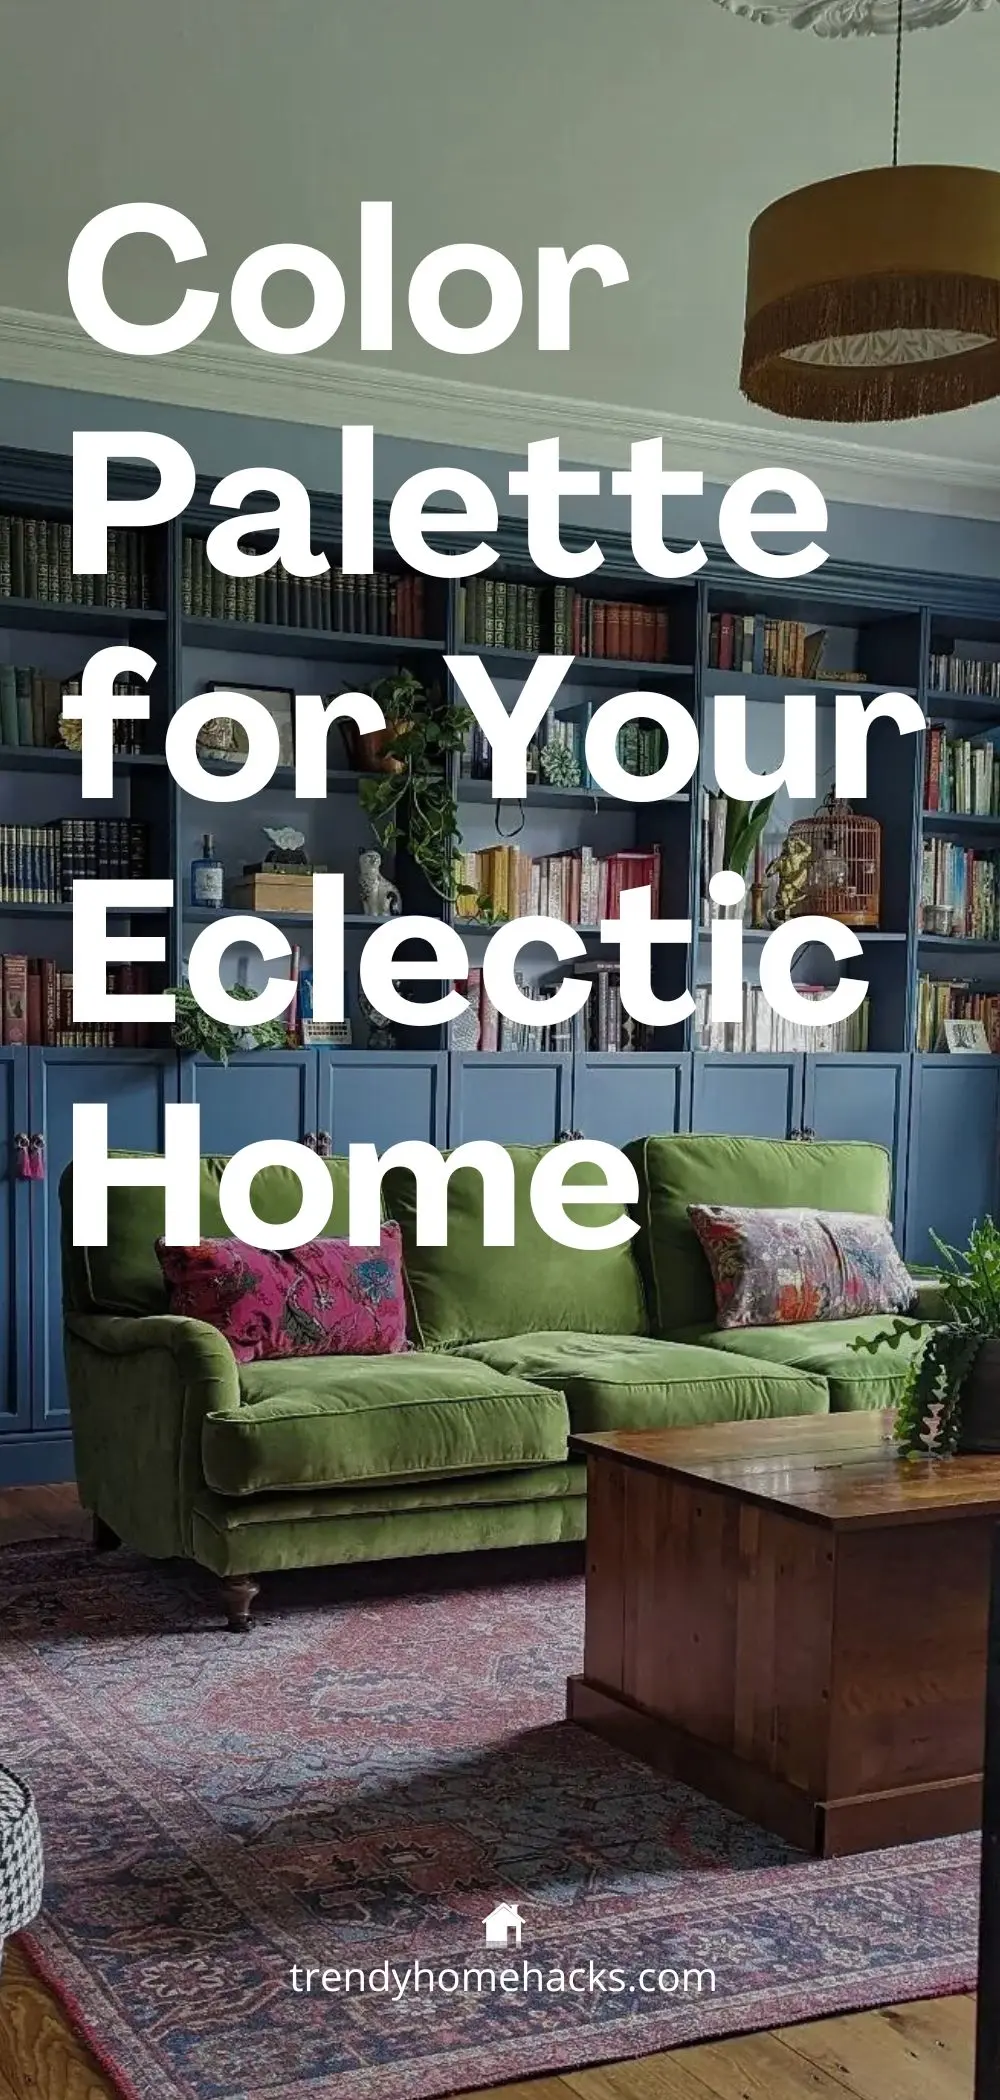 a tall Pinterest pin with a dark background image of a living room and text overlay "Color Palette for Your Eclectic Home."